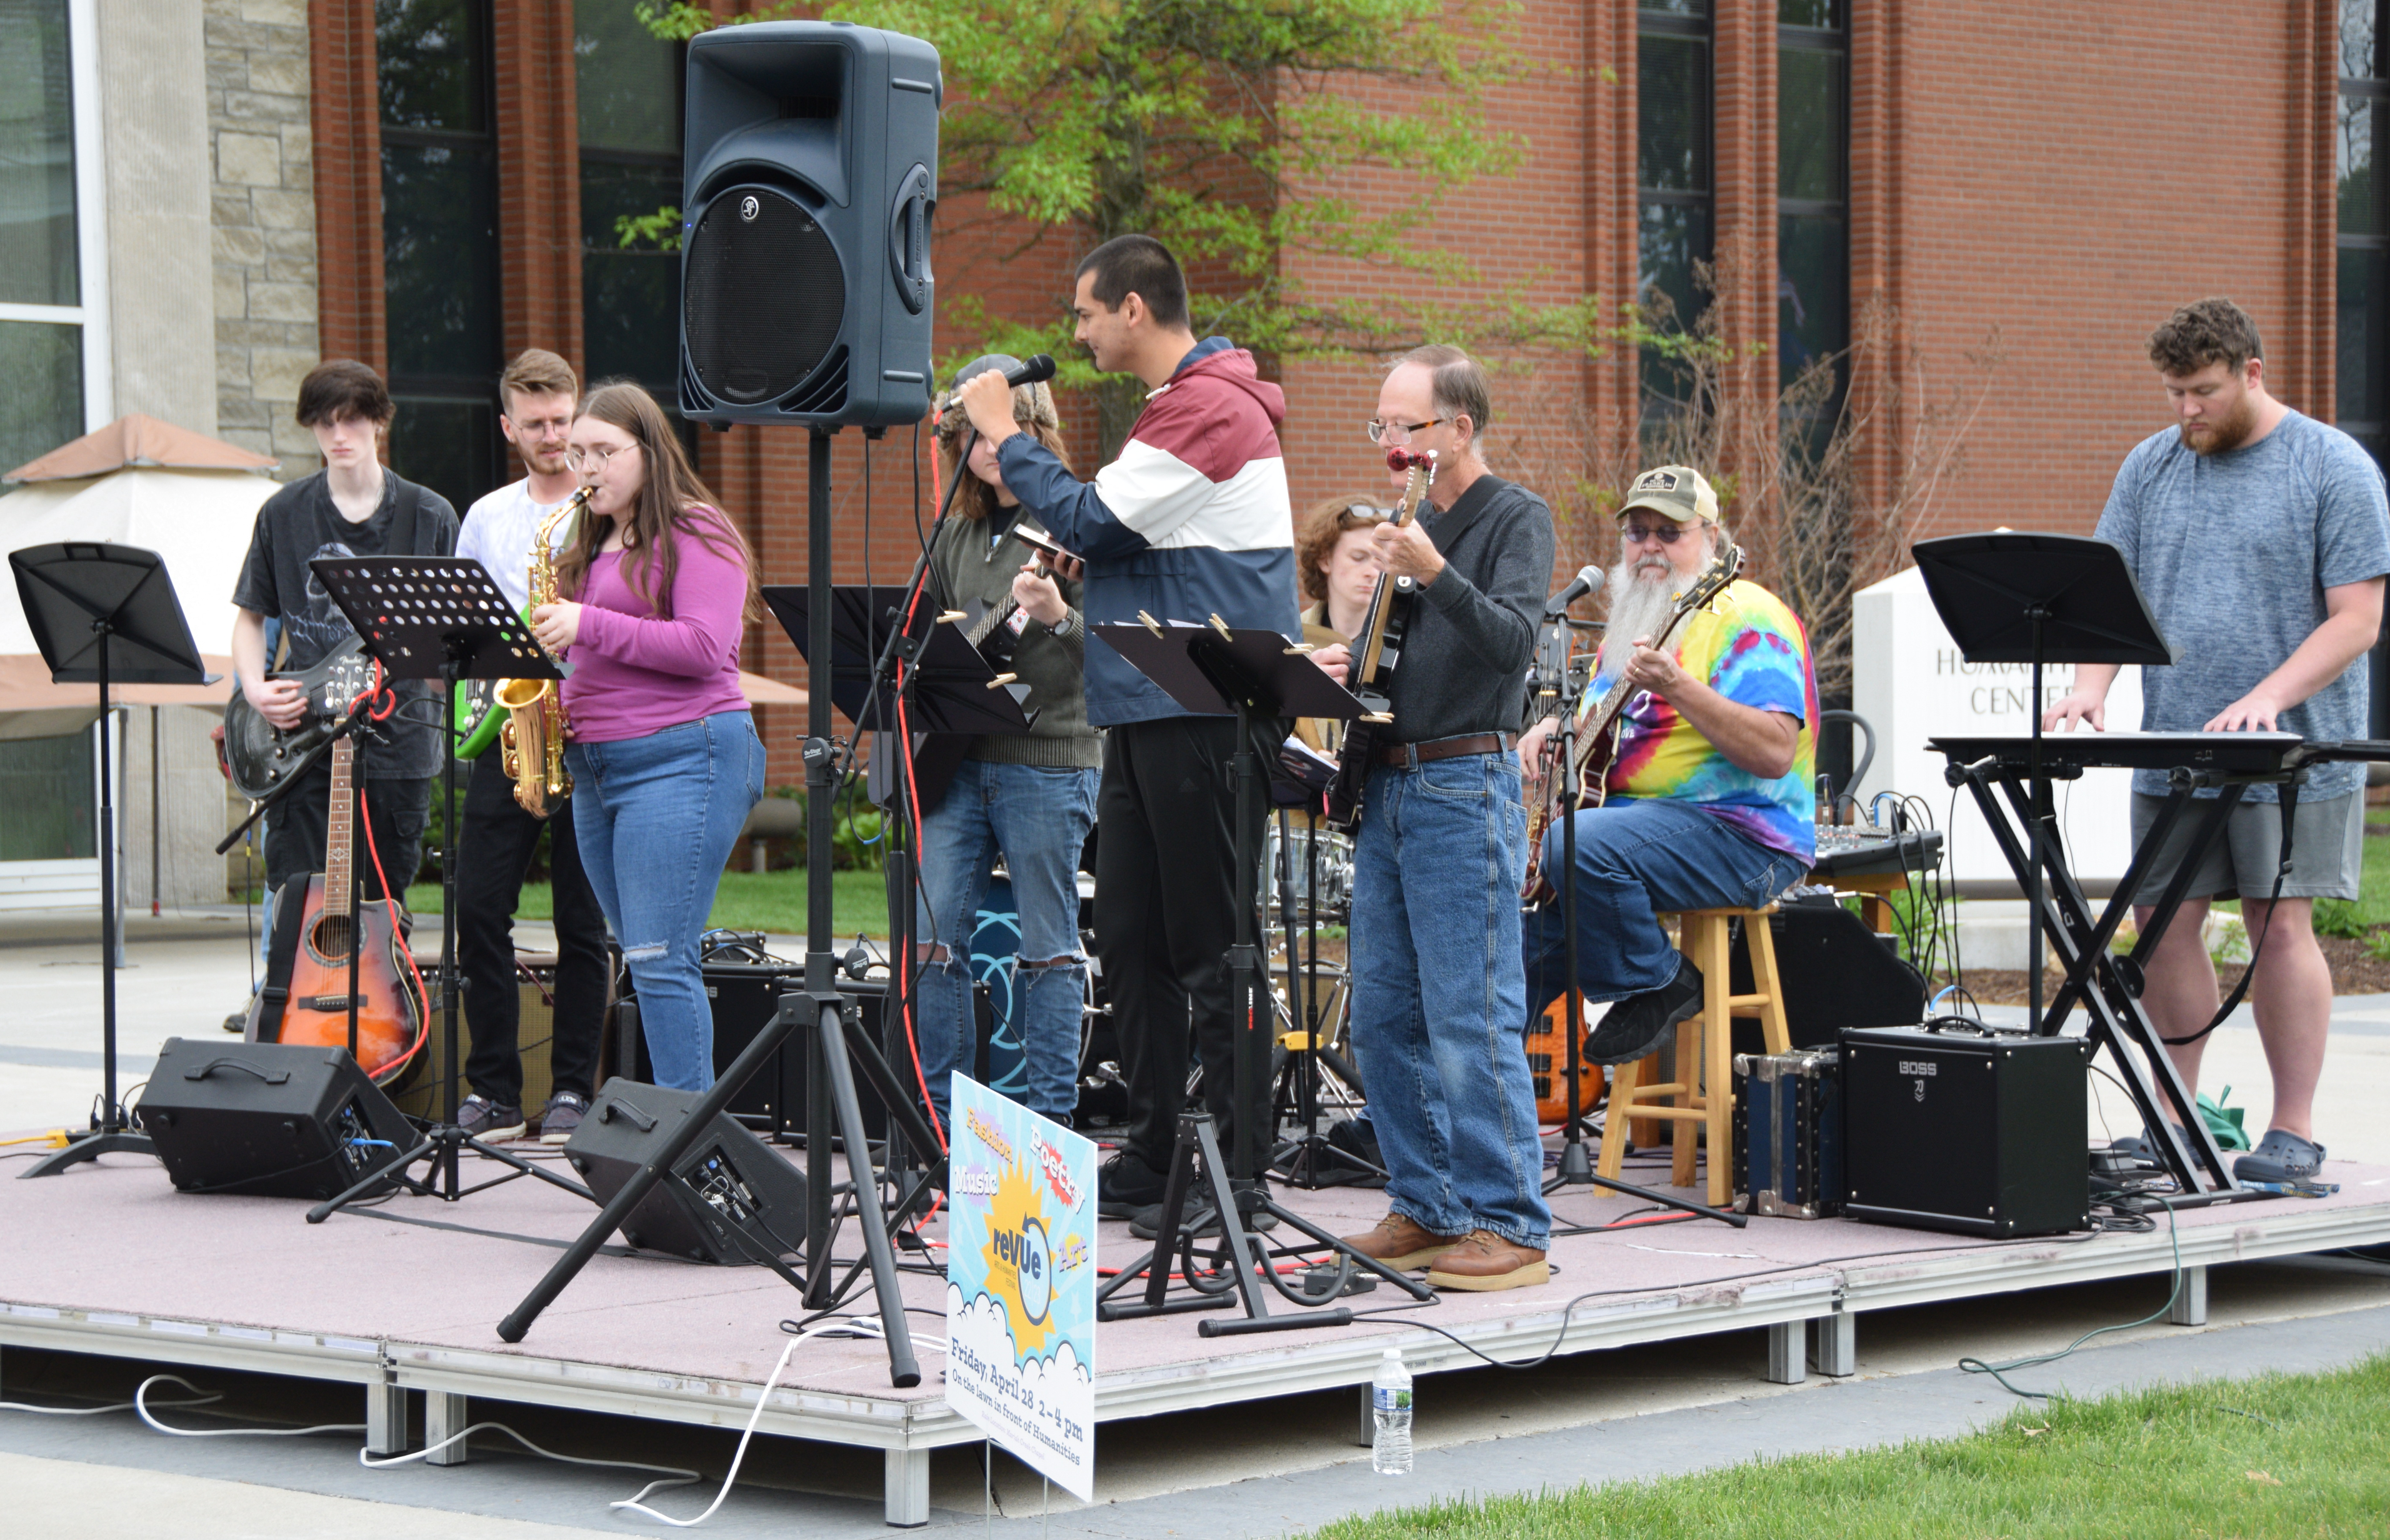 VU Blues Ensemble performs on stage at reVUe: Arts and Humanities Festival at entrance to Shircliff Humanities Center